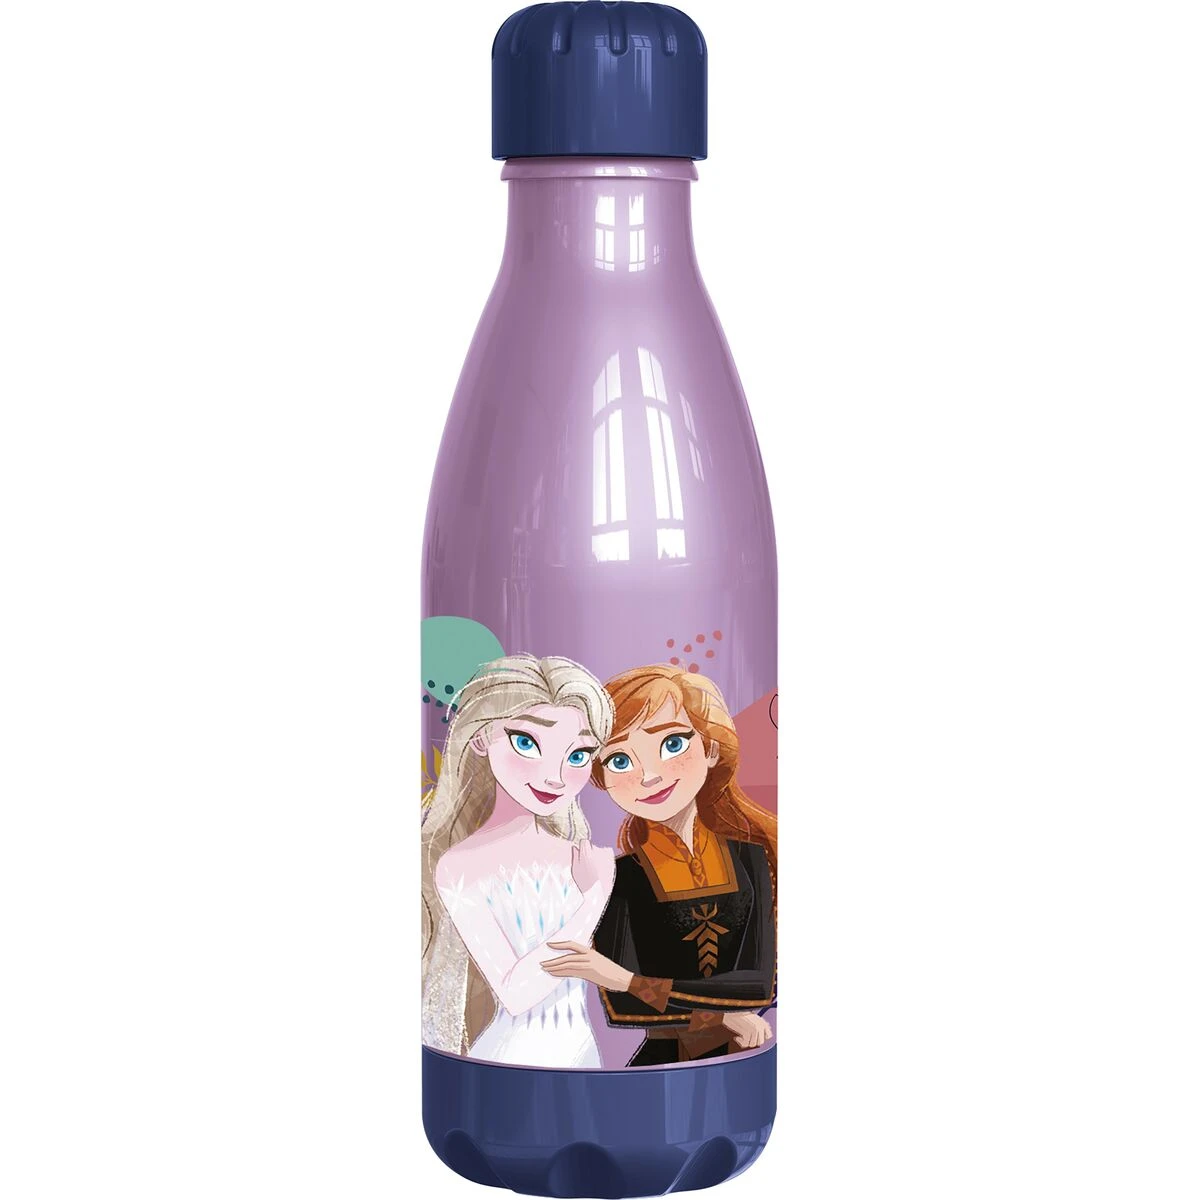 Purple bottle with animated female characters design